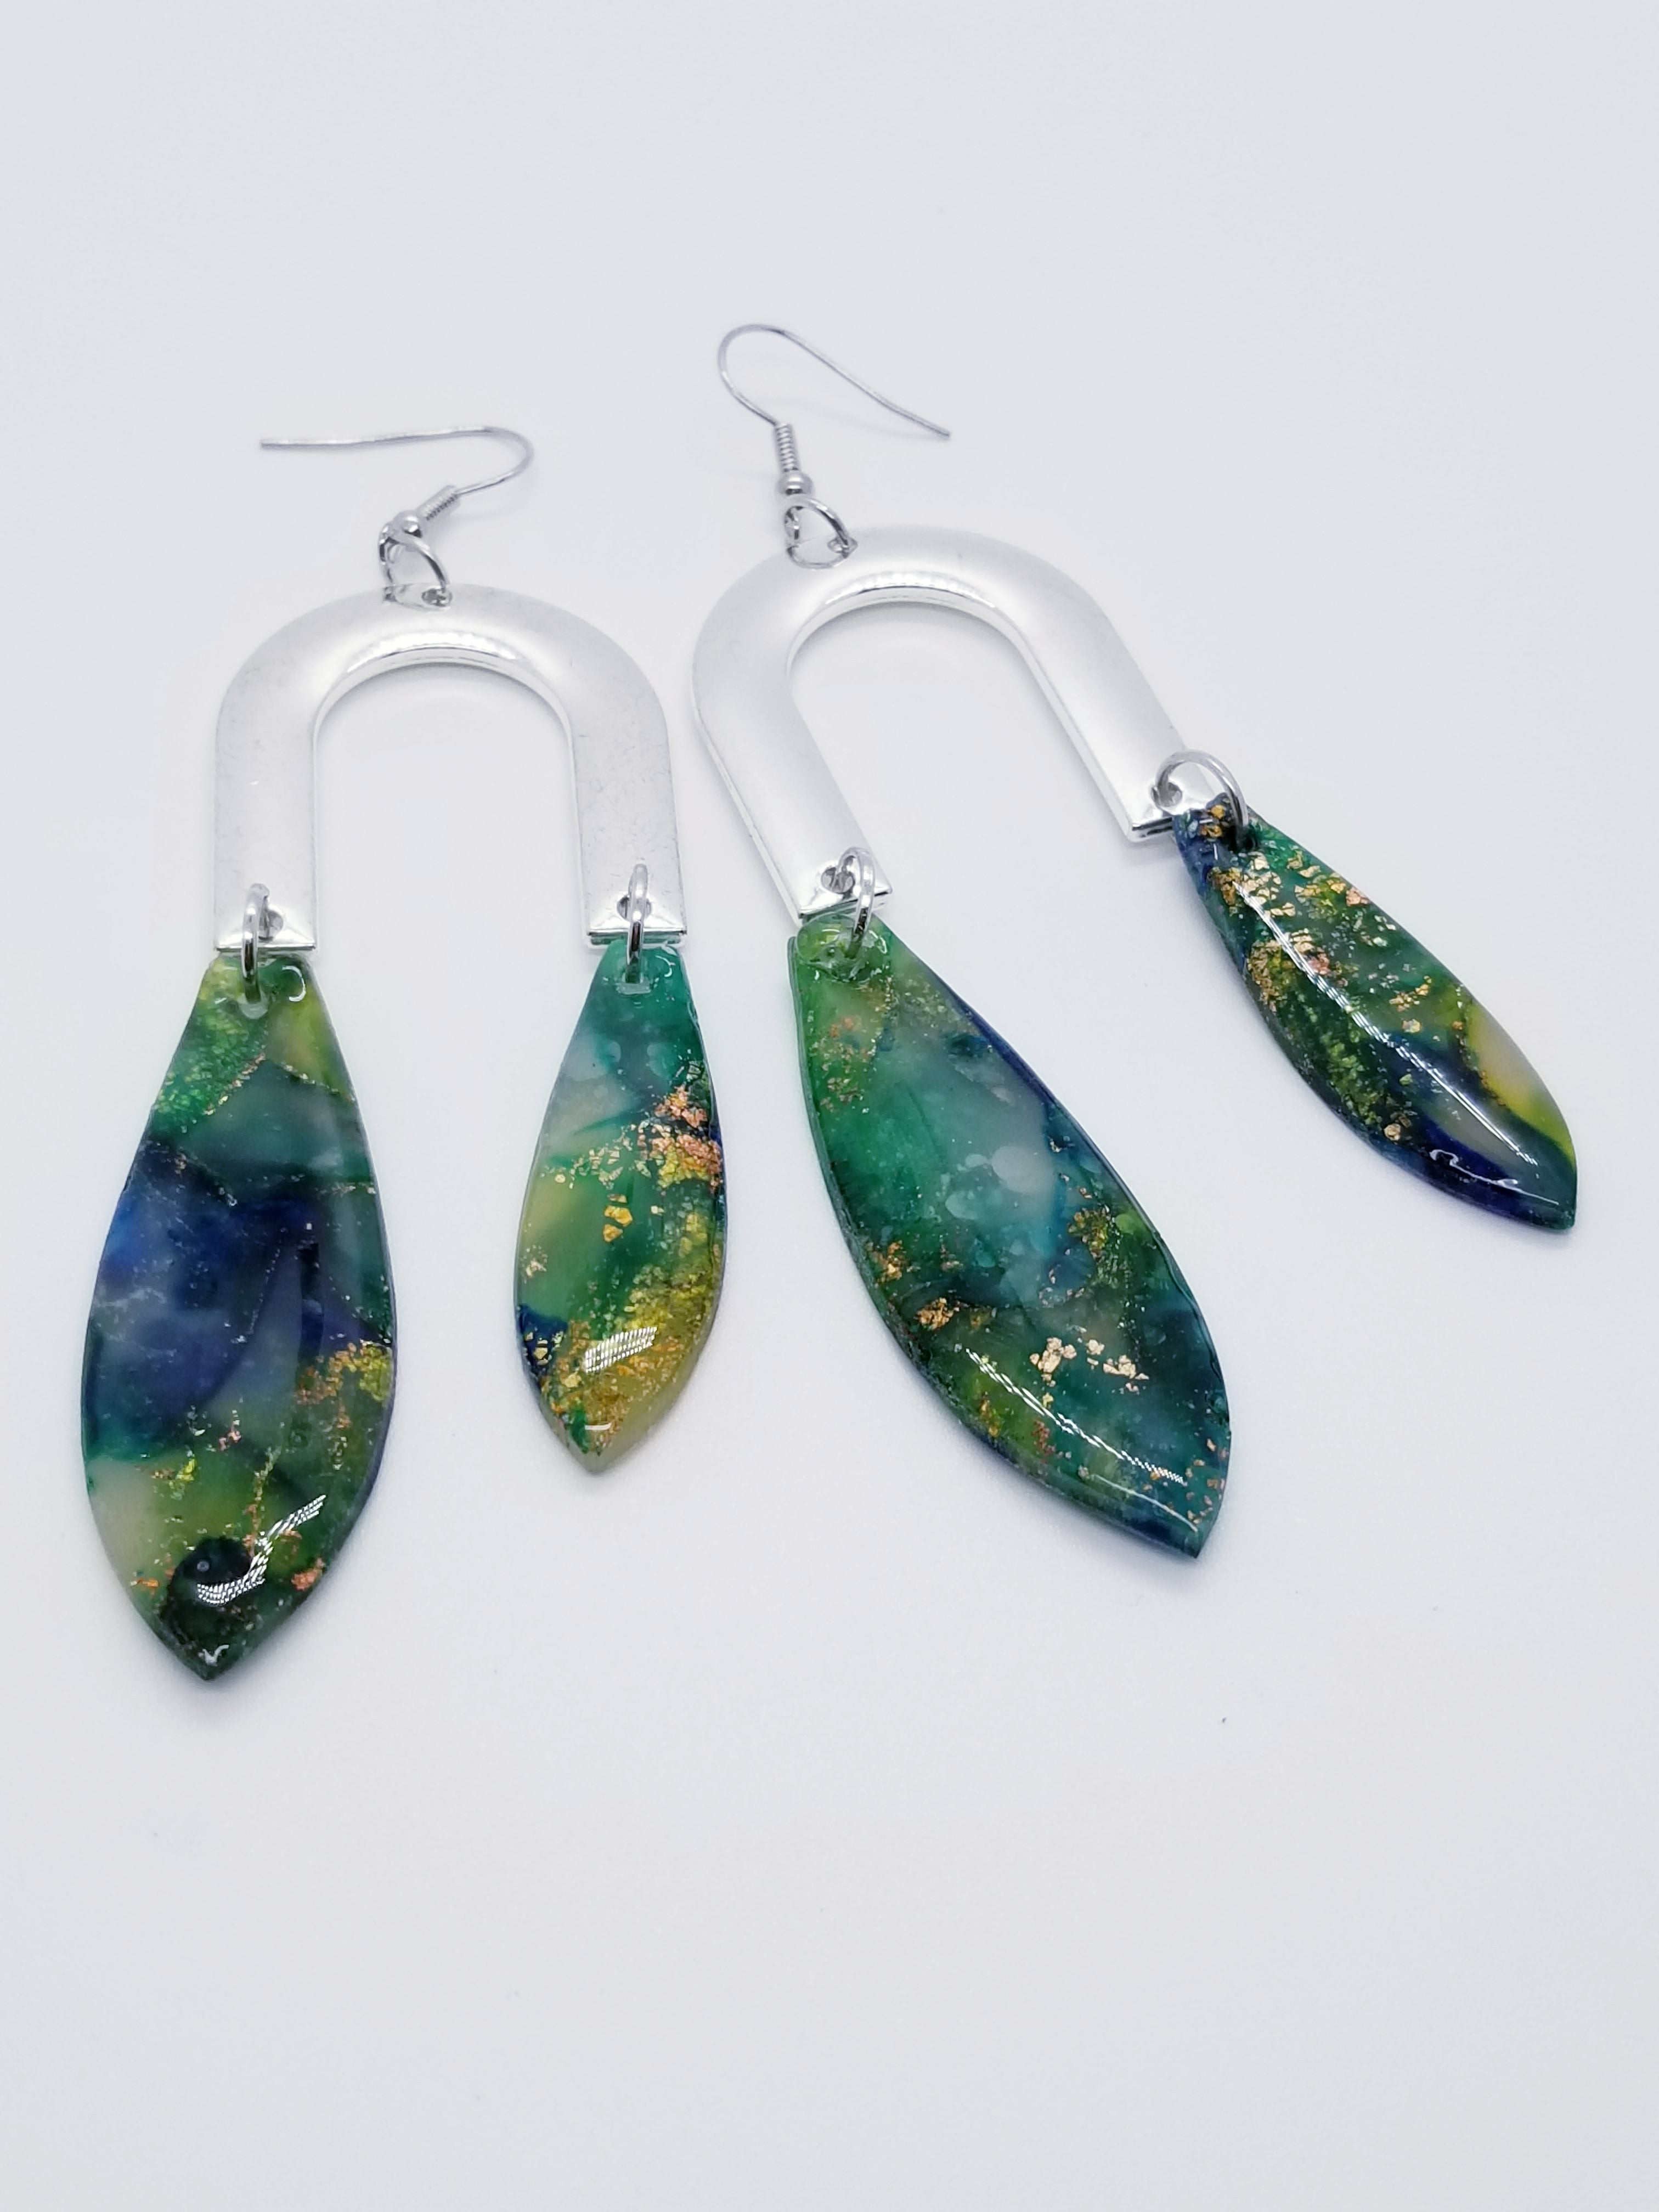 Length: 4 inches | Weight: 0.7 ounces  Distinctly You! The earrings are handmade using green and gold swirl resin design, silver u-shaped charms, and hypoallergenic hooks with back closures. 